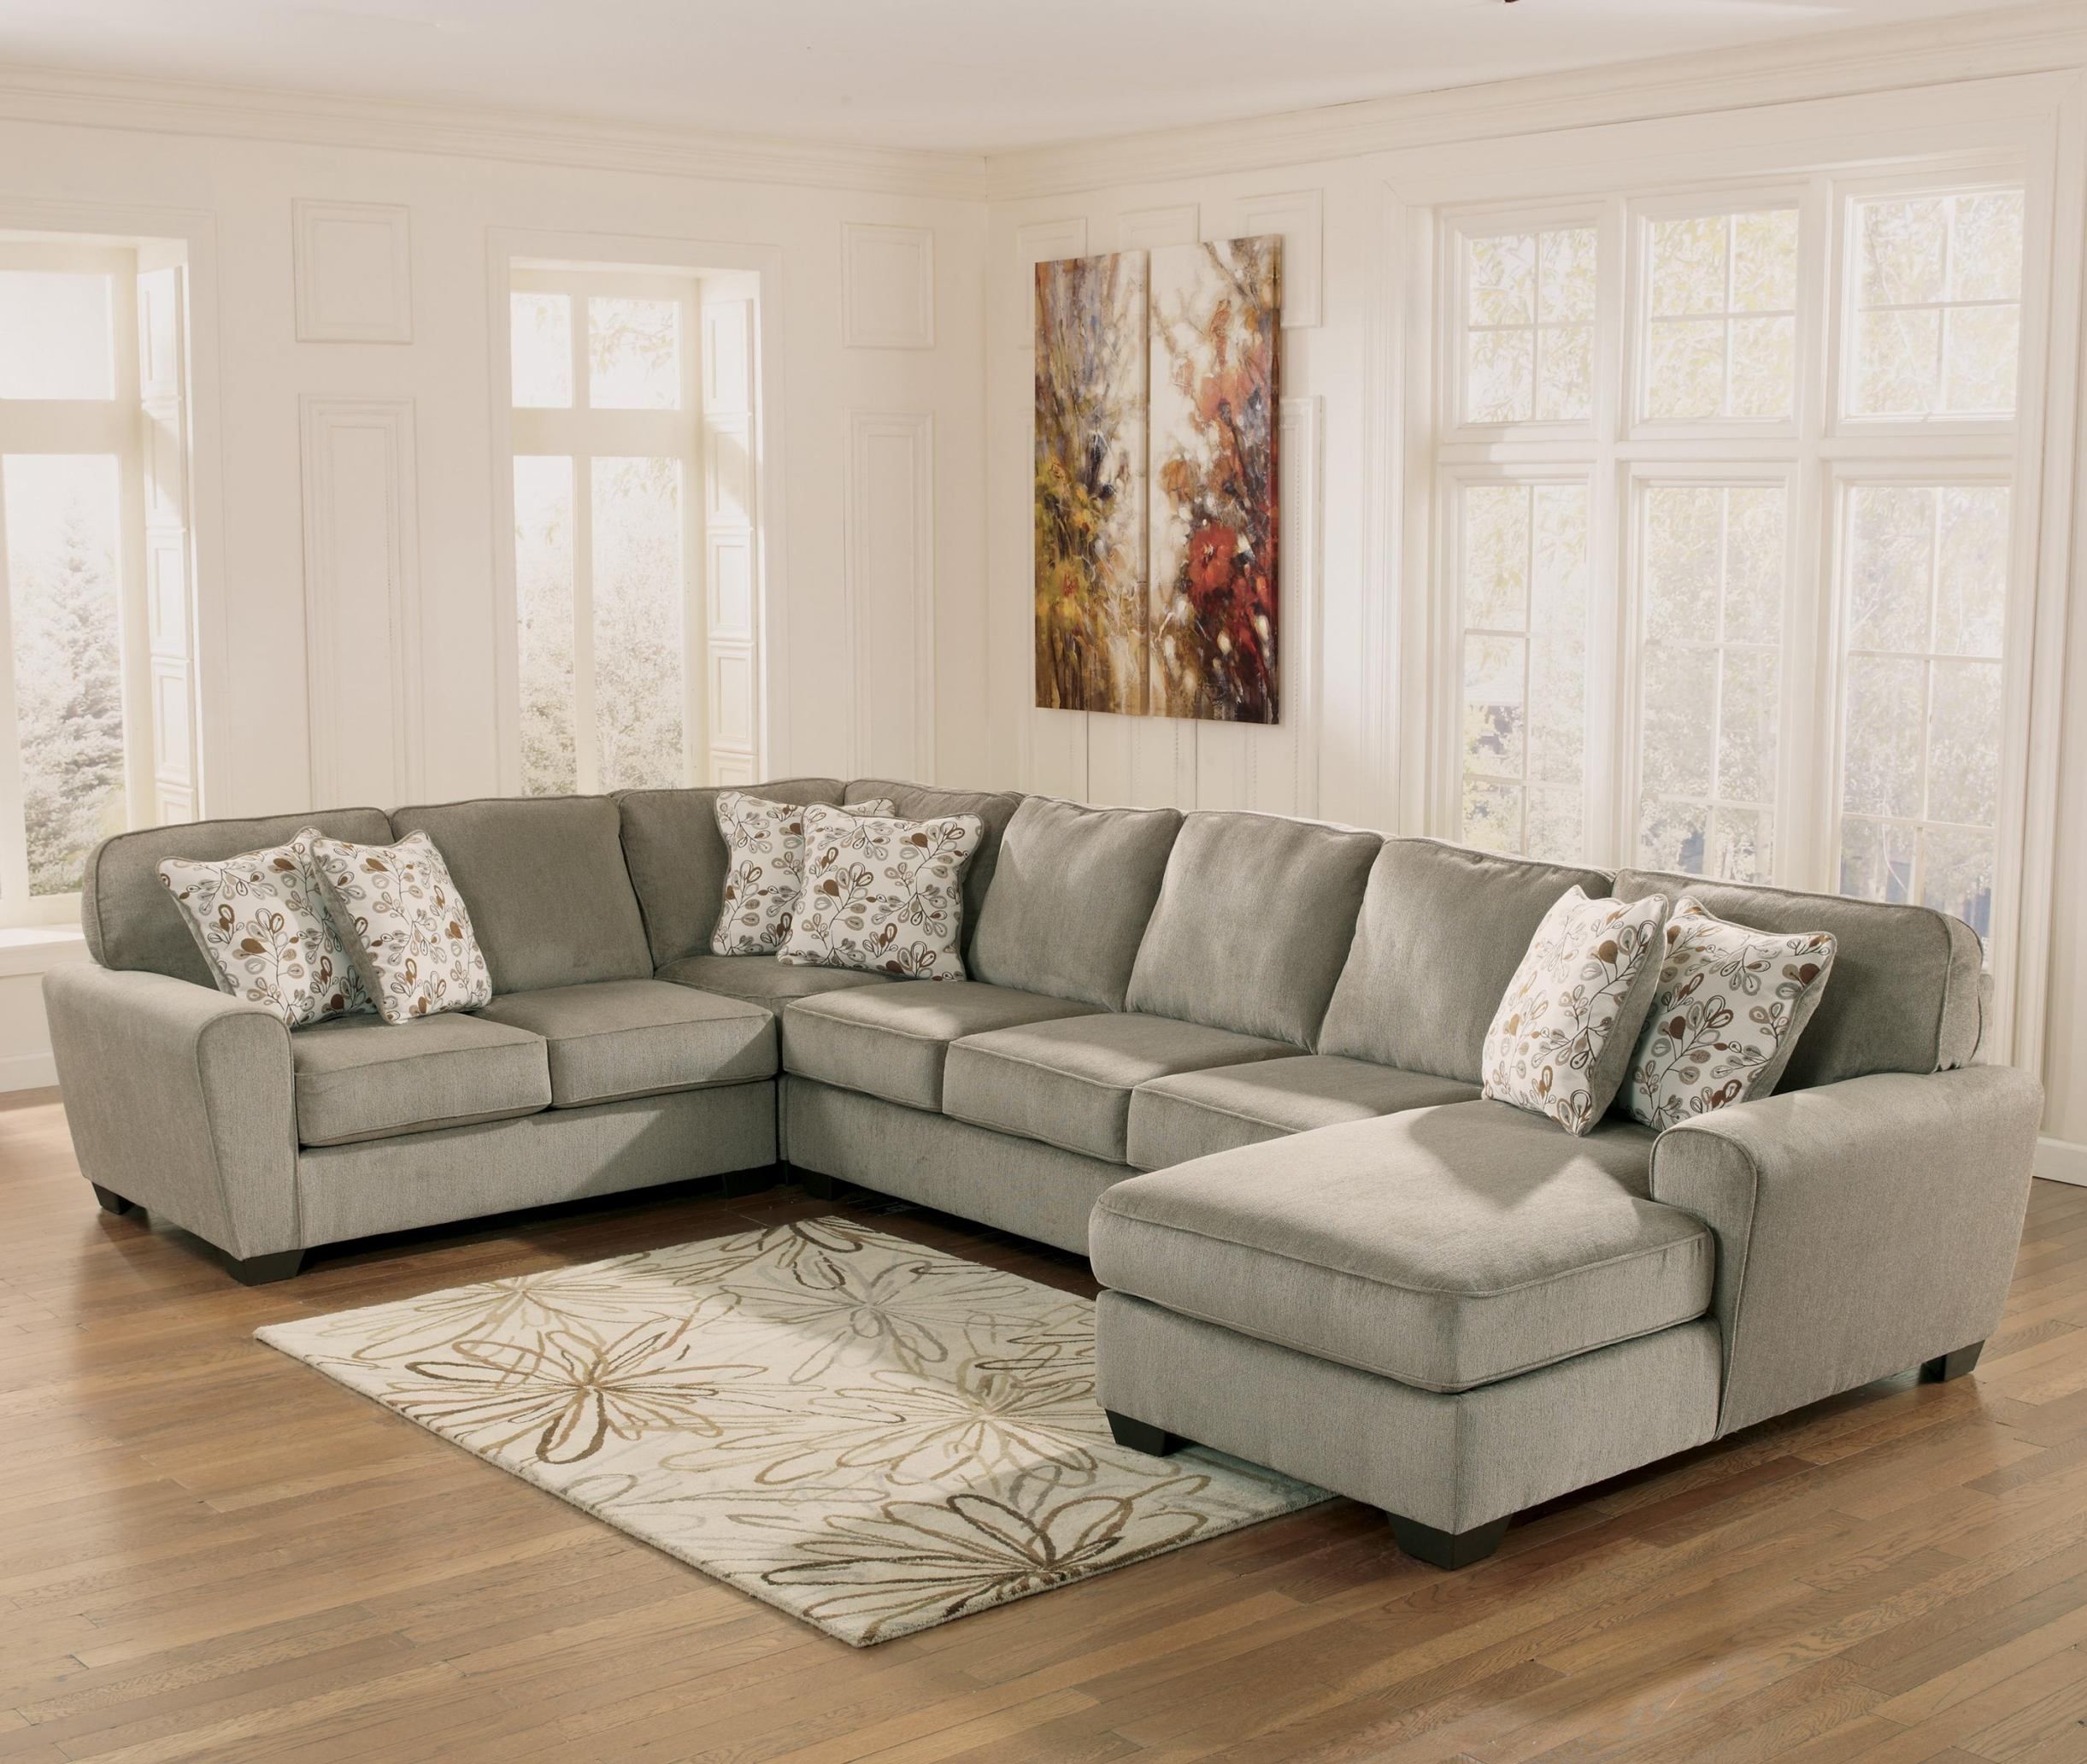 Ashley Furniture Hattiesburg Ms | Agrimarques Throughout Hattiesburg Ms Sectional Sofas (Photo 1 of 10)